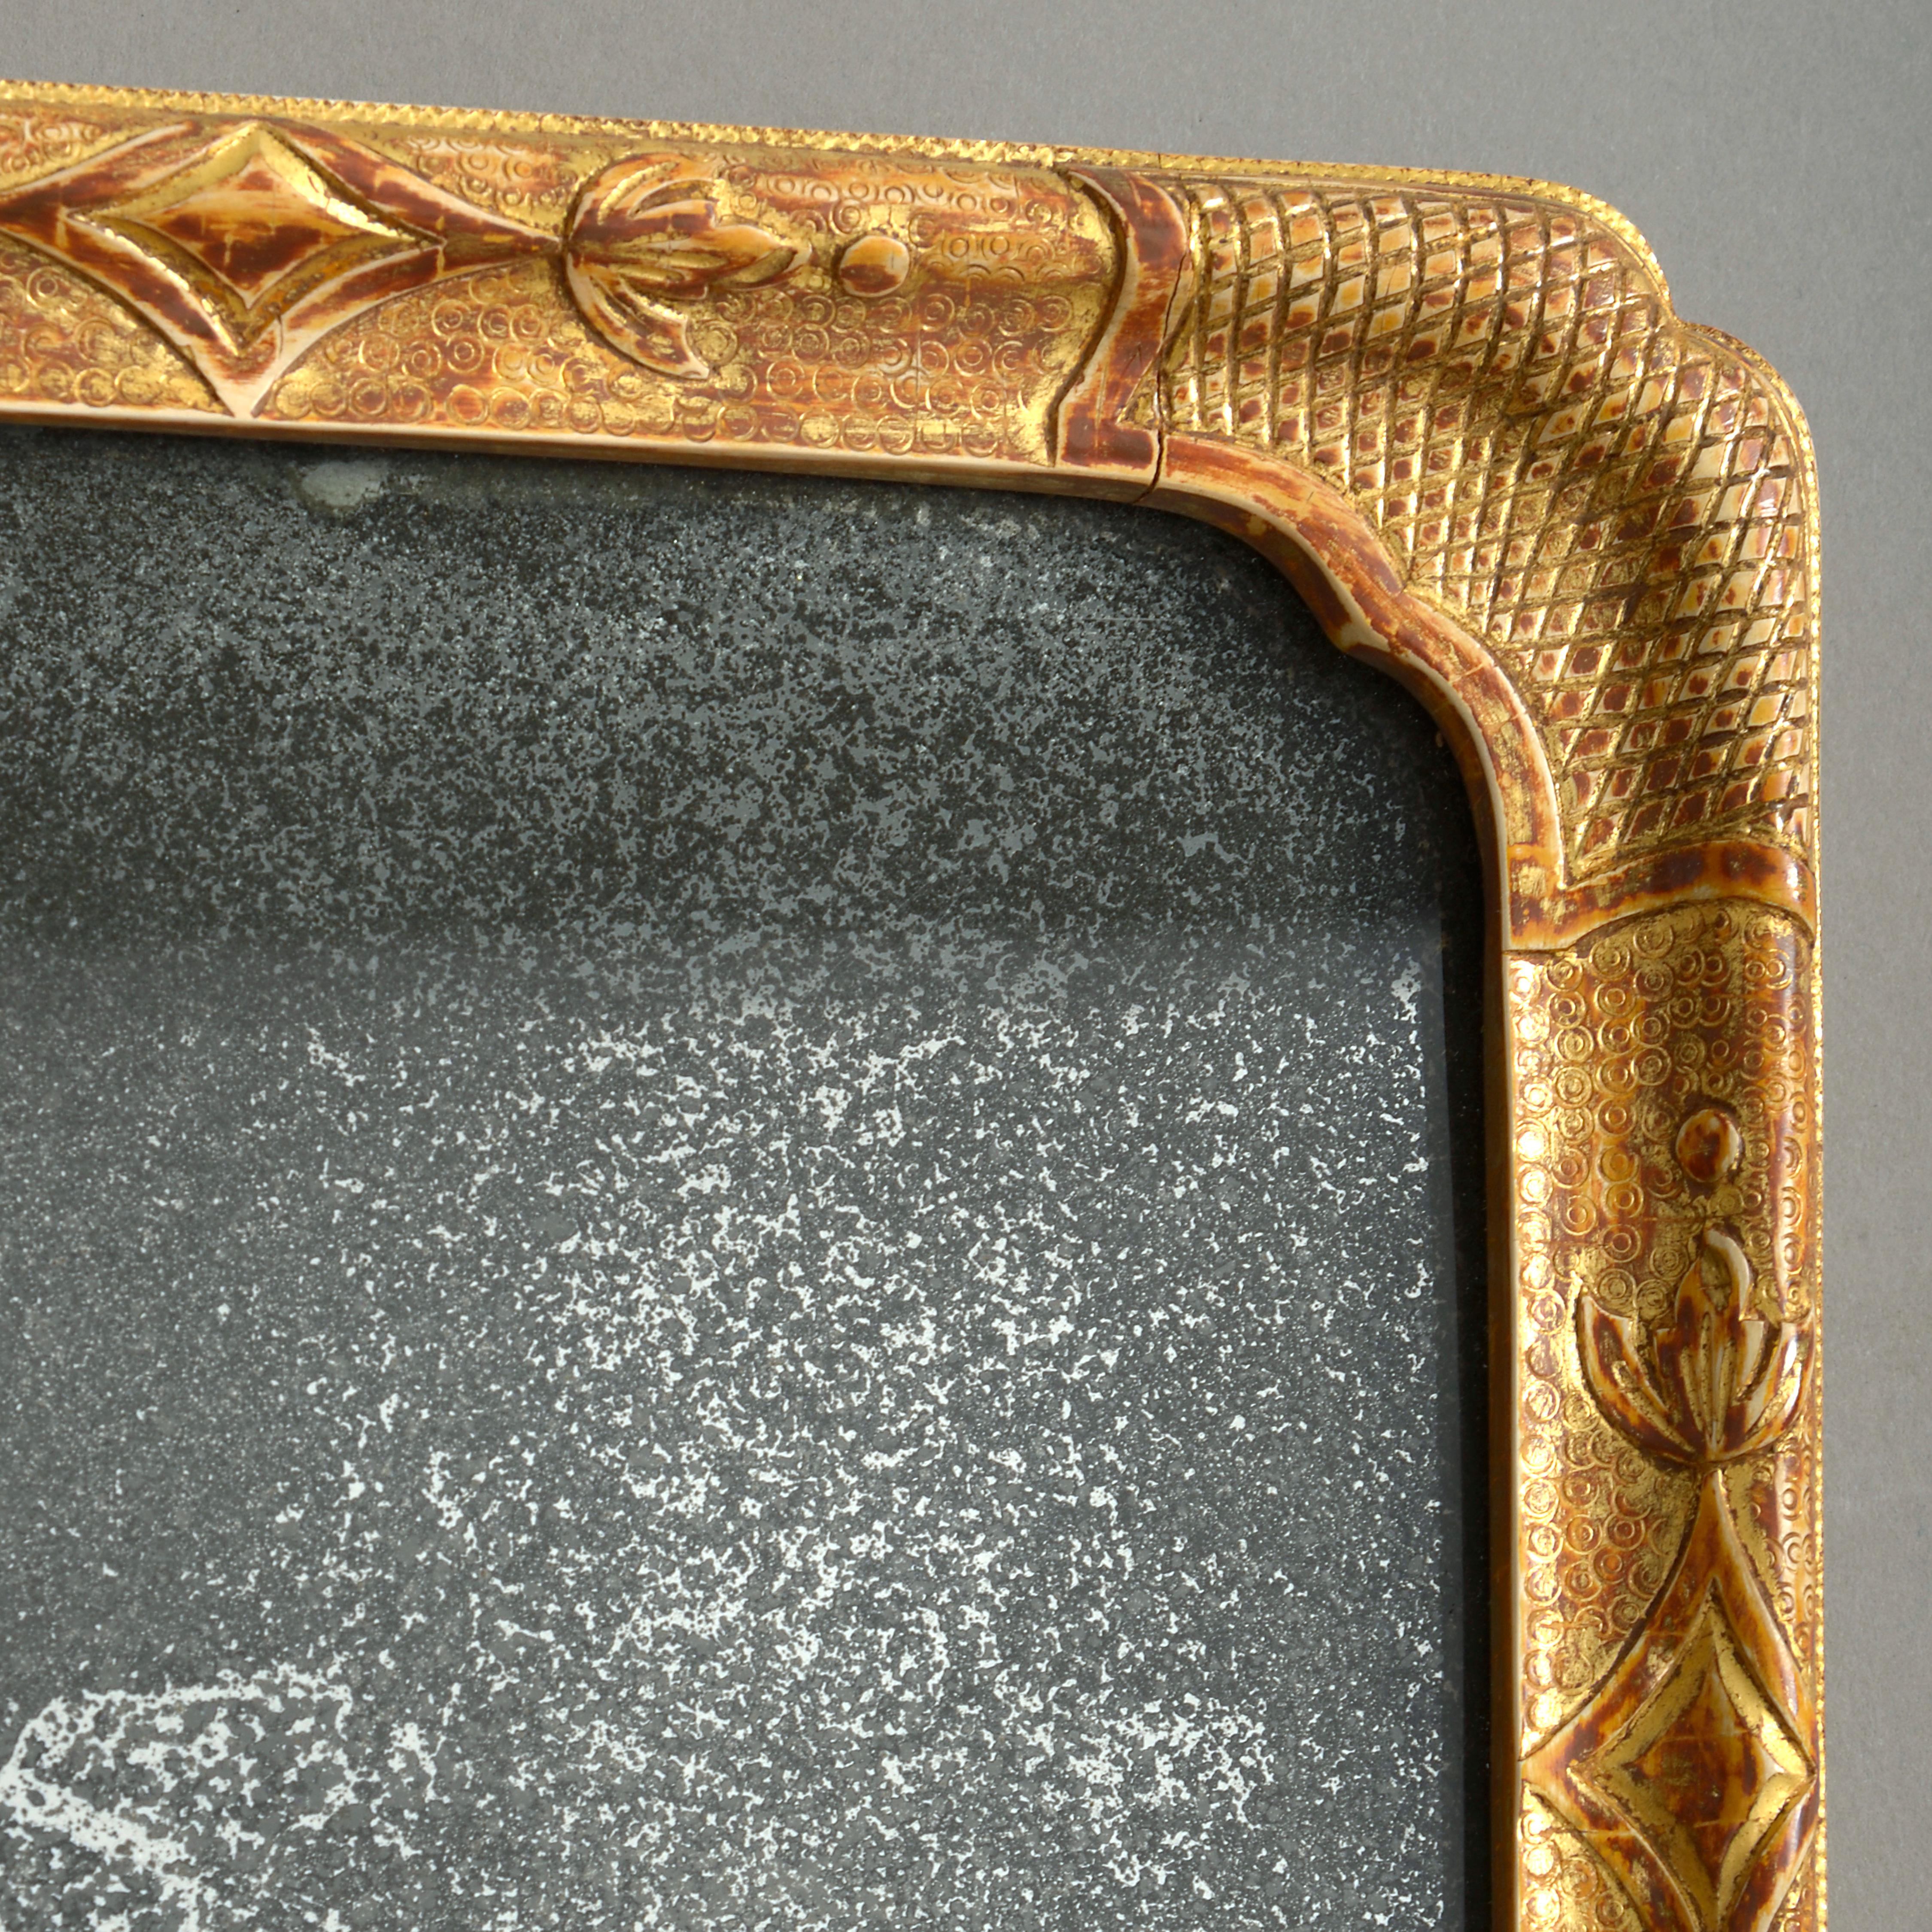 An early 18th century George I Period girandole mirror, the mercury glass plate held within a carved gilt gesso mirror of rectangular form, having re-entrant corners and supporting two brass candle arms.